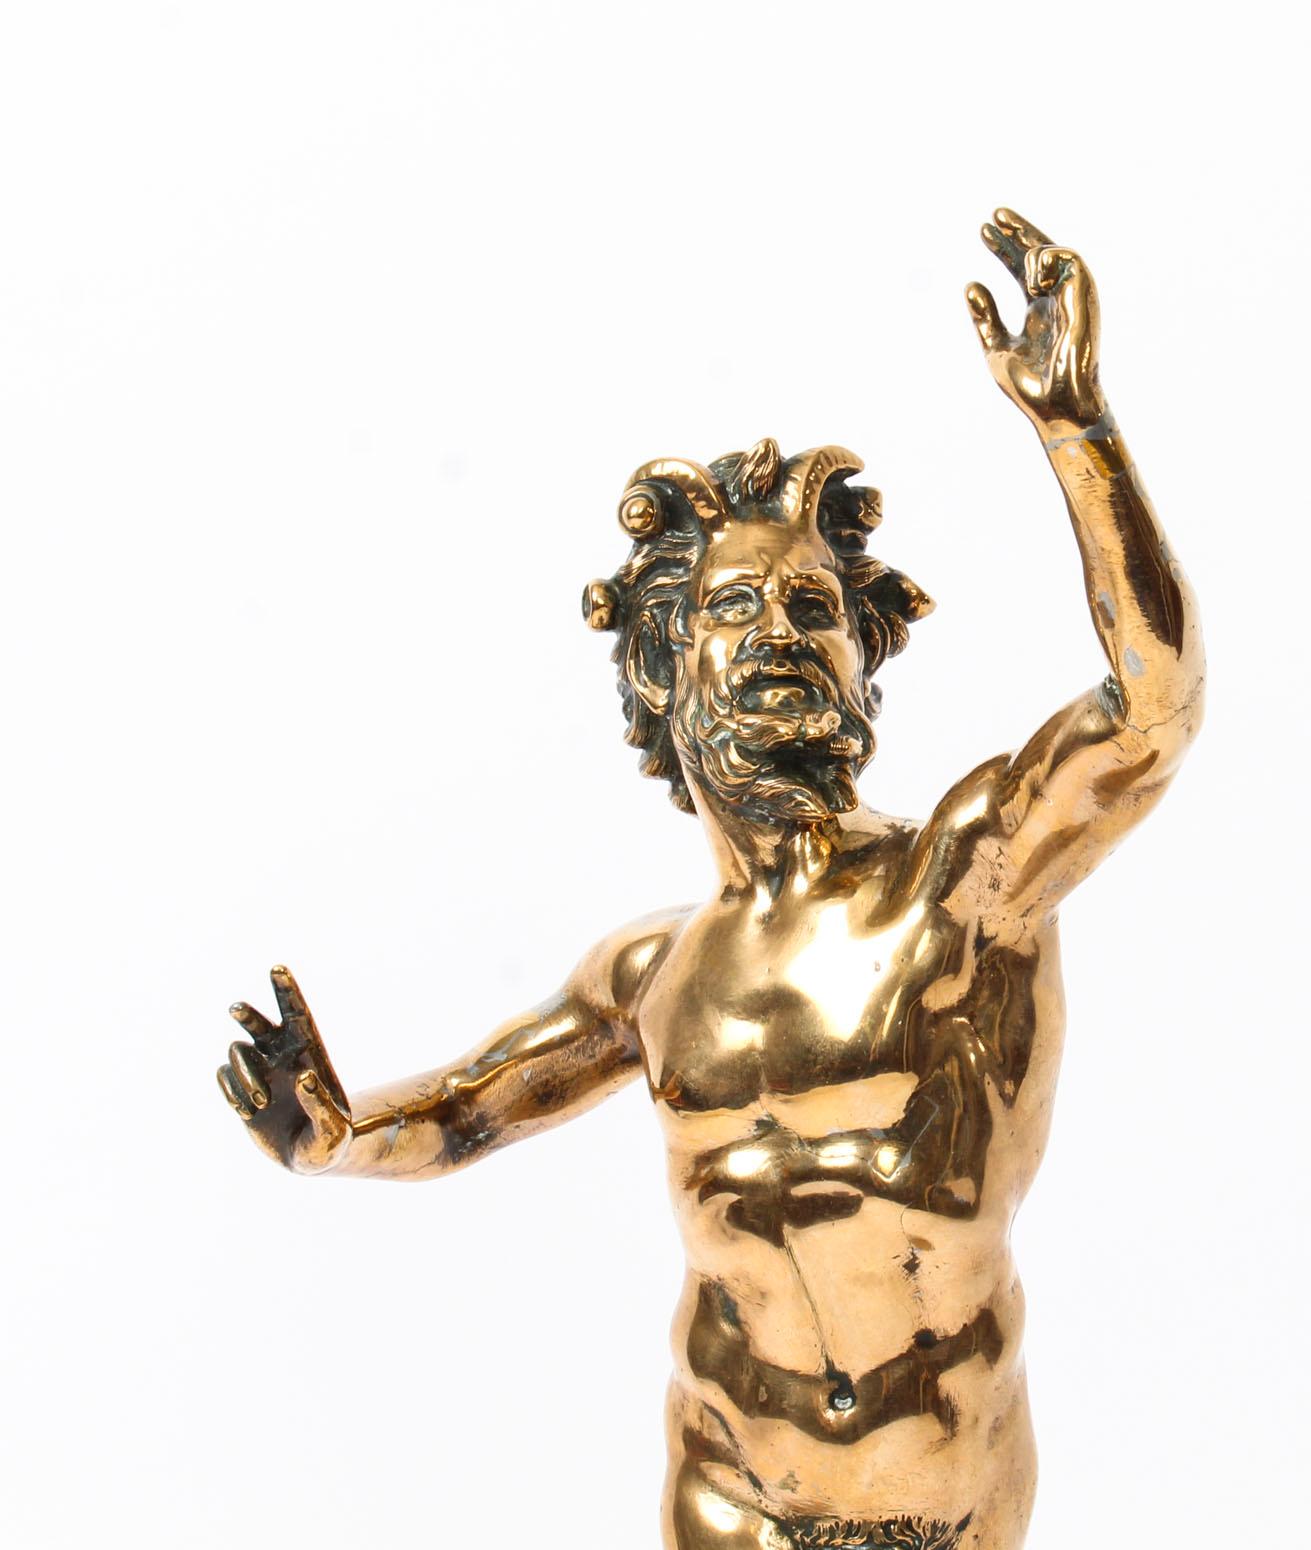 A superbly cast antique Italian Grand tour bronze figure of a dancing faun, circa 1850 in date.

This is a golden bronze Grand tour copy of the Roman faun that was dug up in Pompeii in 1830. The excellently cast faun is represented in a dancing